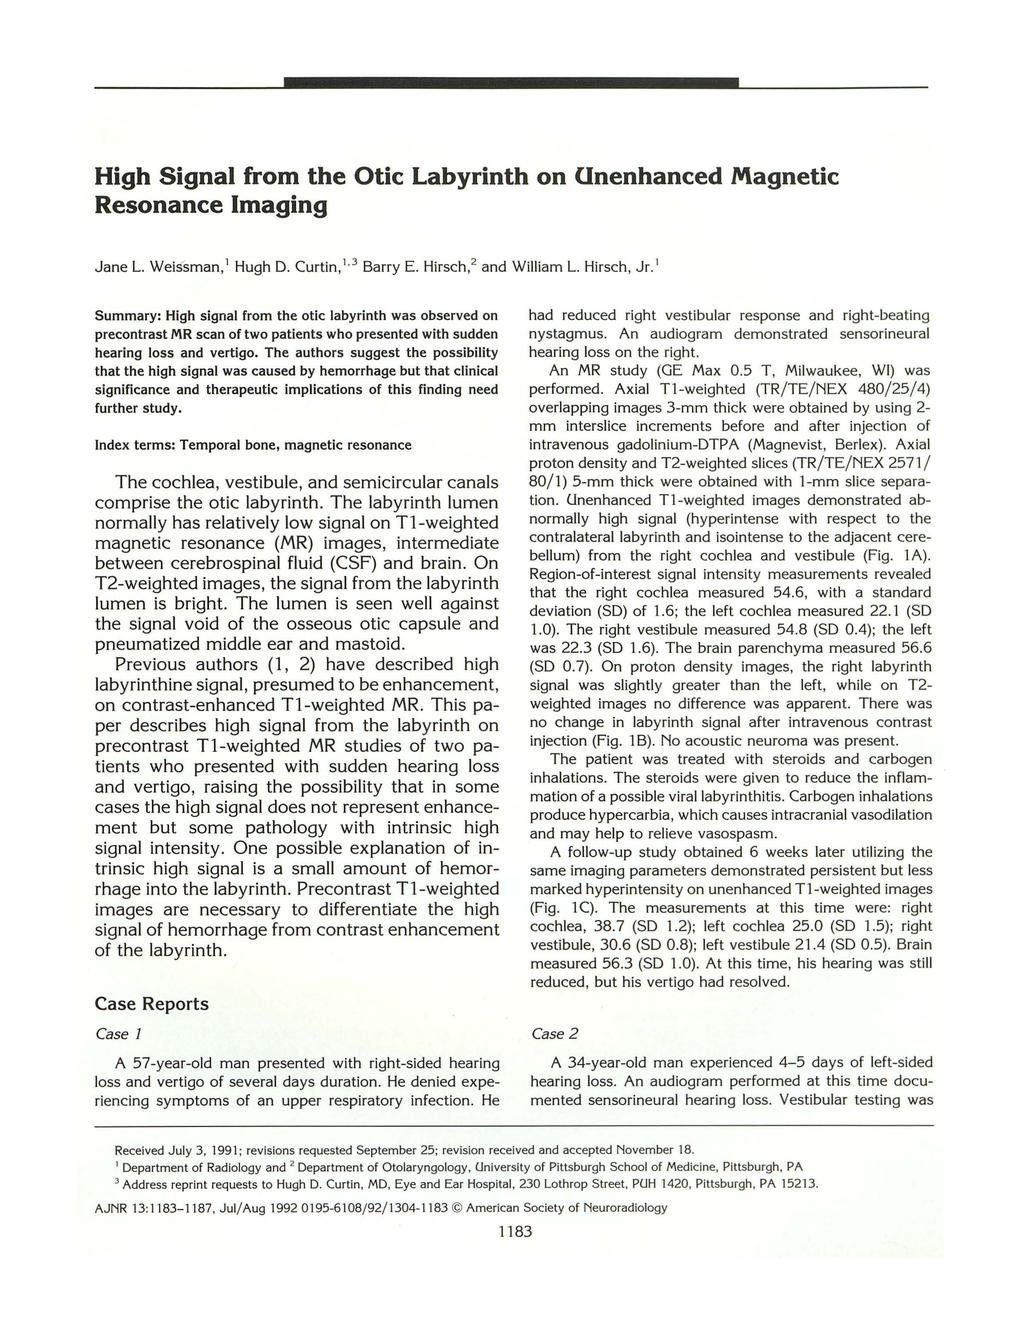 High Signal from the Otic Labyrinth on Onenhanced Magnetic Resonance Imaging JaneL. Weissman, 1 Hugh D. Curtin, 1 3 Barry E. Hirsch, 2 and William L. Hirsch, Jr.